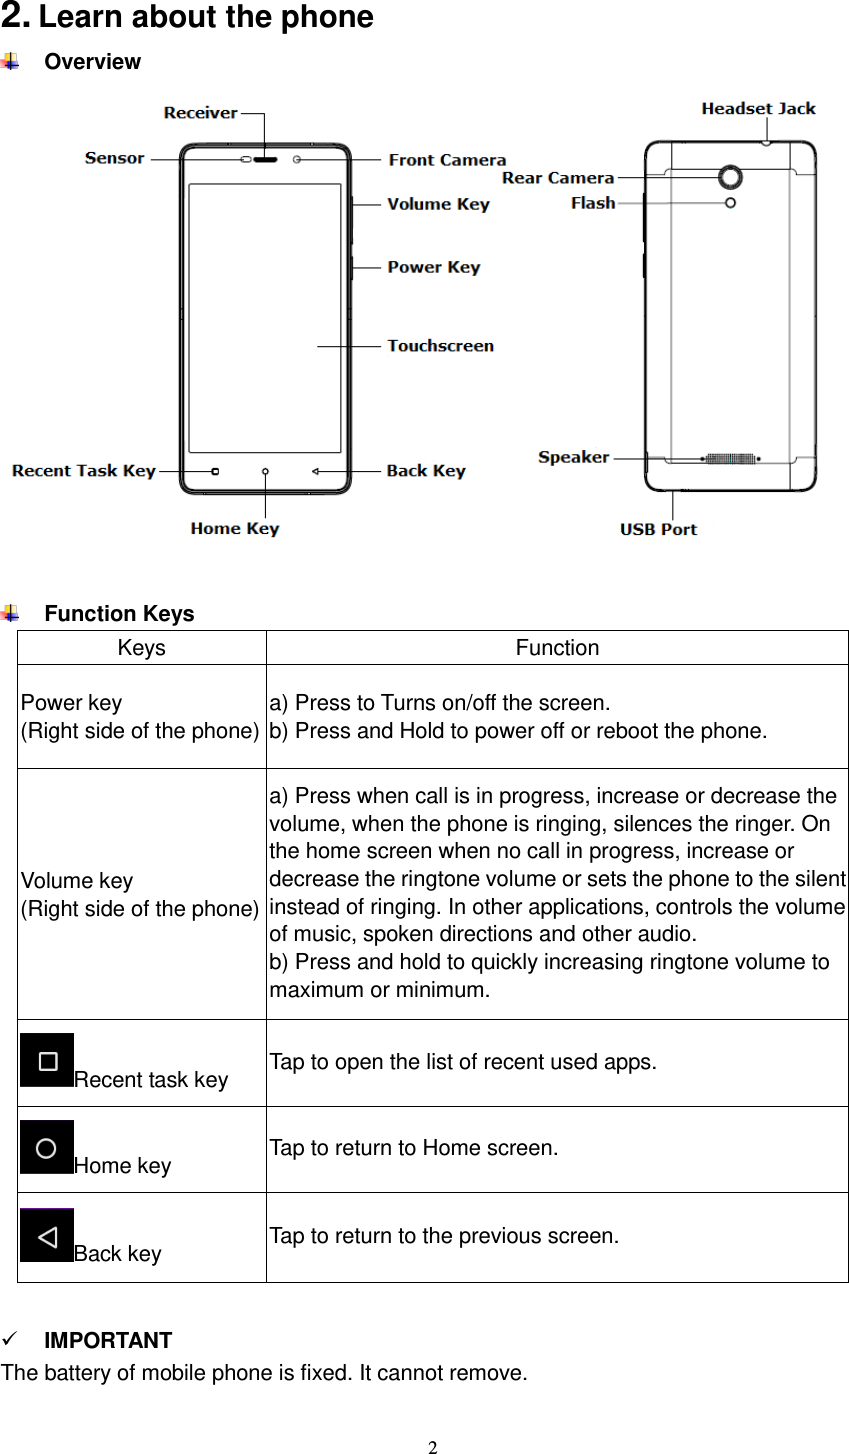  2  2. Learn about the phone  Overview    Function Keys Keys Function Power key (Right side of the phone) a) Press to Turns on/off the screen. b) Press and Hold to power off or reboot the phone.   Volume key (Right side of the phone) a) Press when call is in progress, increase or decrease the volume, when the phone is ringing, silences the ringer. On the home screen when no call in progress, increase or decrease the ringtone volume or sets the phone to the silent instead of ringing. In other applications, controls the volume of music, spoken directions and other audio. b) Press and hold to quickly increasing ringtone volume to maximum or minimum.   Recent task key Tap to open the list of recent used apps. Home key Tap to return to Home screen. Back key Tap to return to the previous screen.    IMPORTANT The battery of mobile phone is fixed. It cannot remove.  